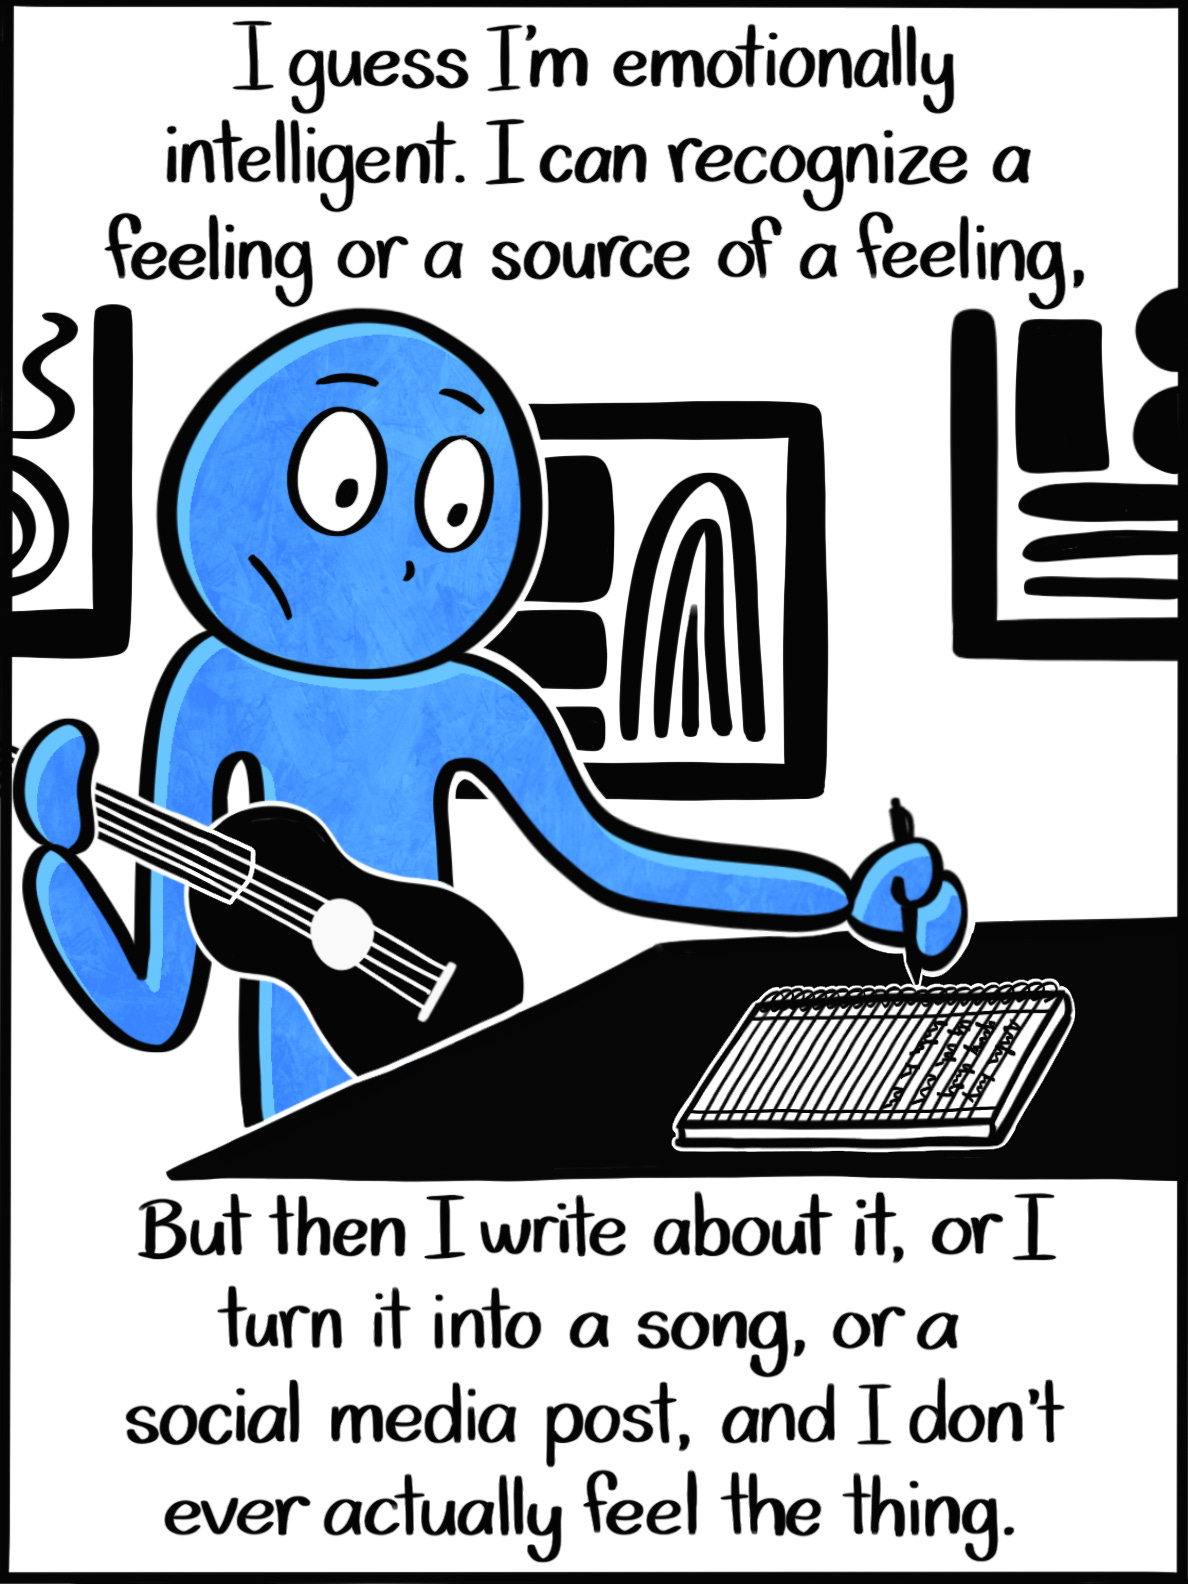 Caption: I guess I'm emotionally intelligent. I can recognize a feeling or a source of a feeling, but then I write about it, or I turn it into a song, or a social media post, and I never actually feel the thing. Image: The Blue Person holds a ukulele in one hand and a pencil with the other. With the pencil, they look like they're about to write something down in a notebook, which rests on a table in front of them. 